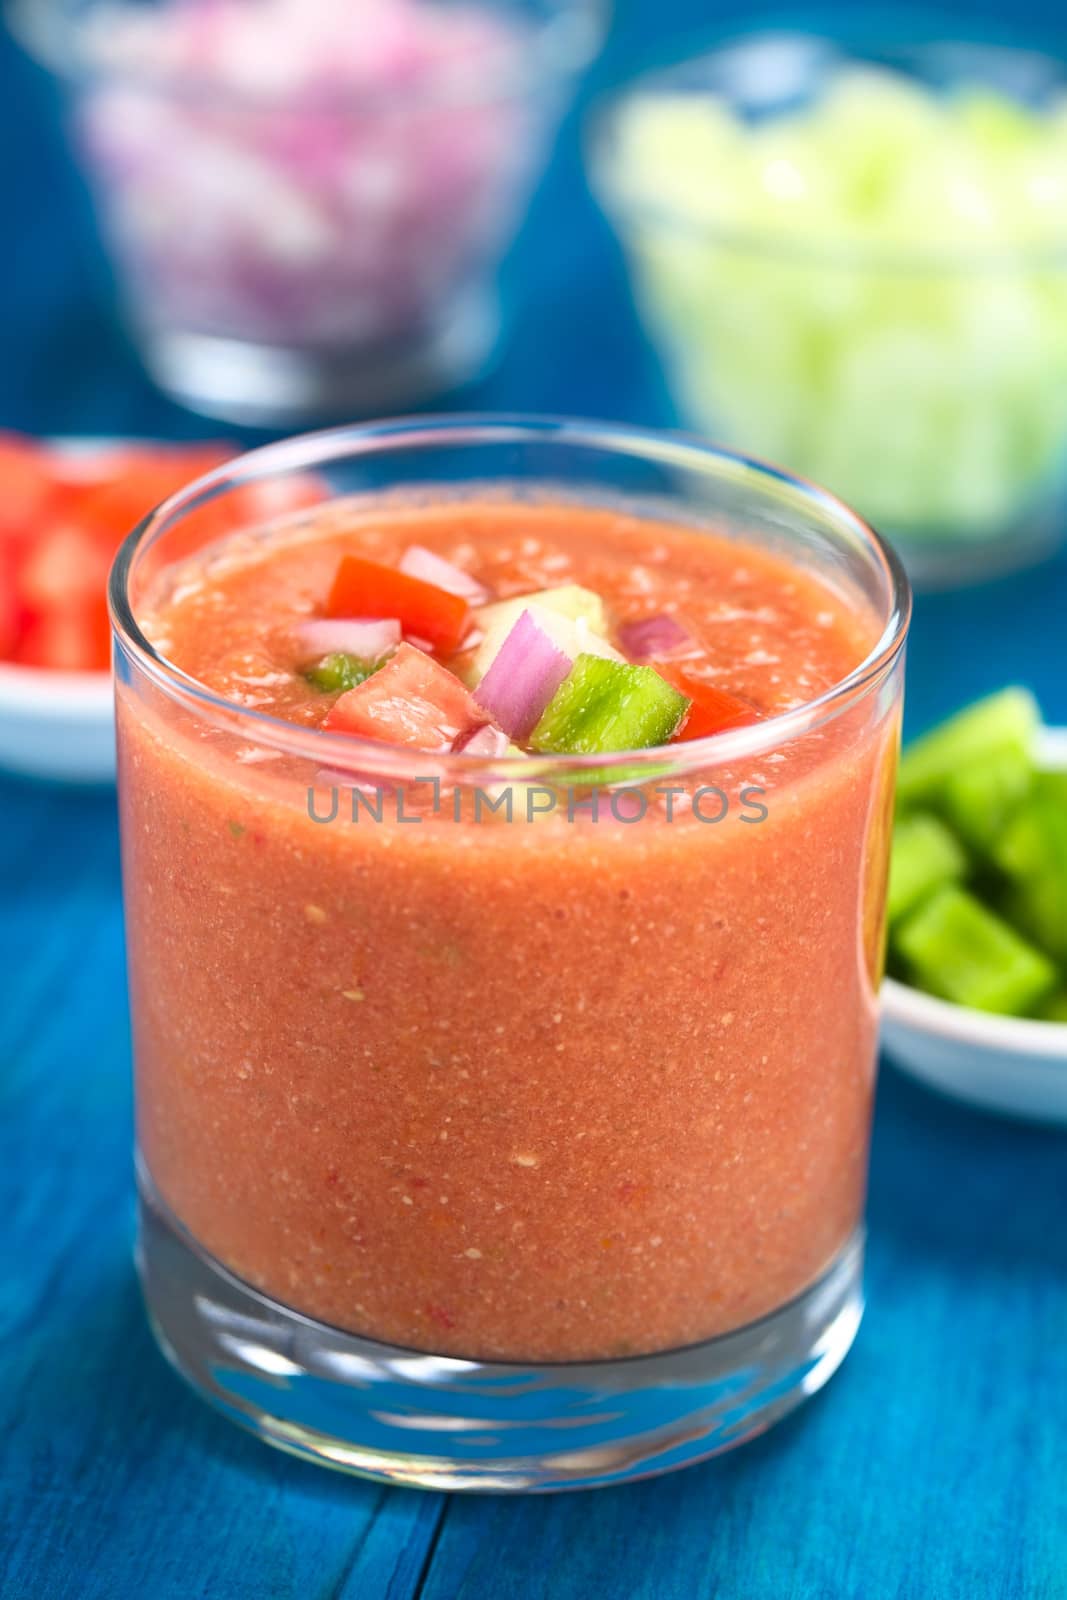 Traditional Spanish cold vegetable soup made of tomato, cucumber, bell pepper, onion, garlic and olive oil served in glass (Selective Focus, Focus on the front of the vegetables on the top of the soup)